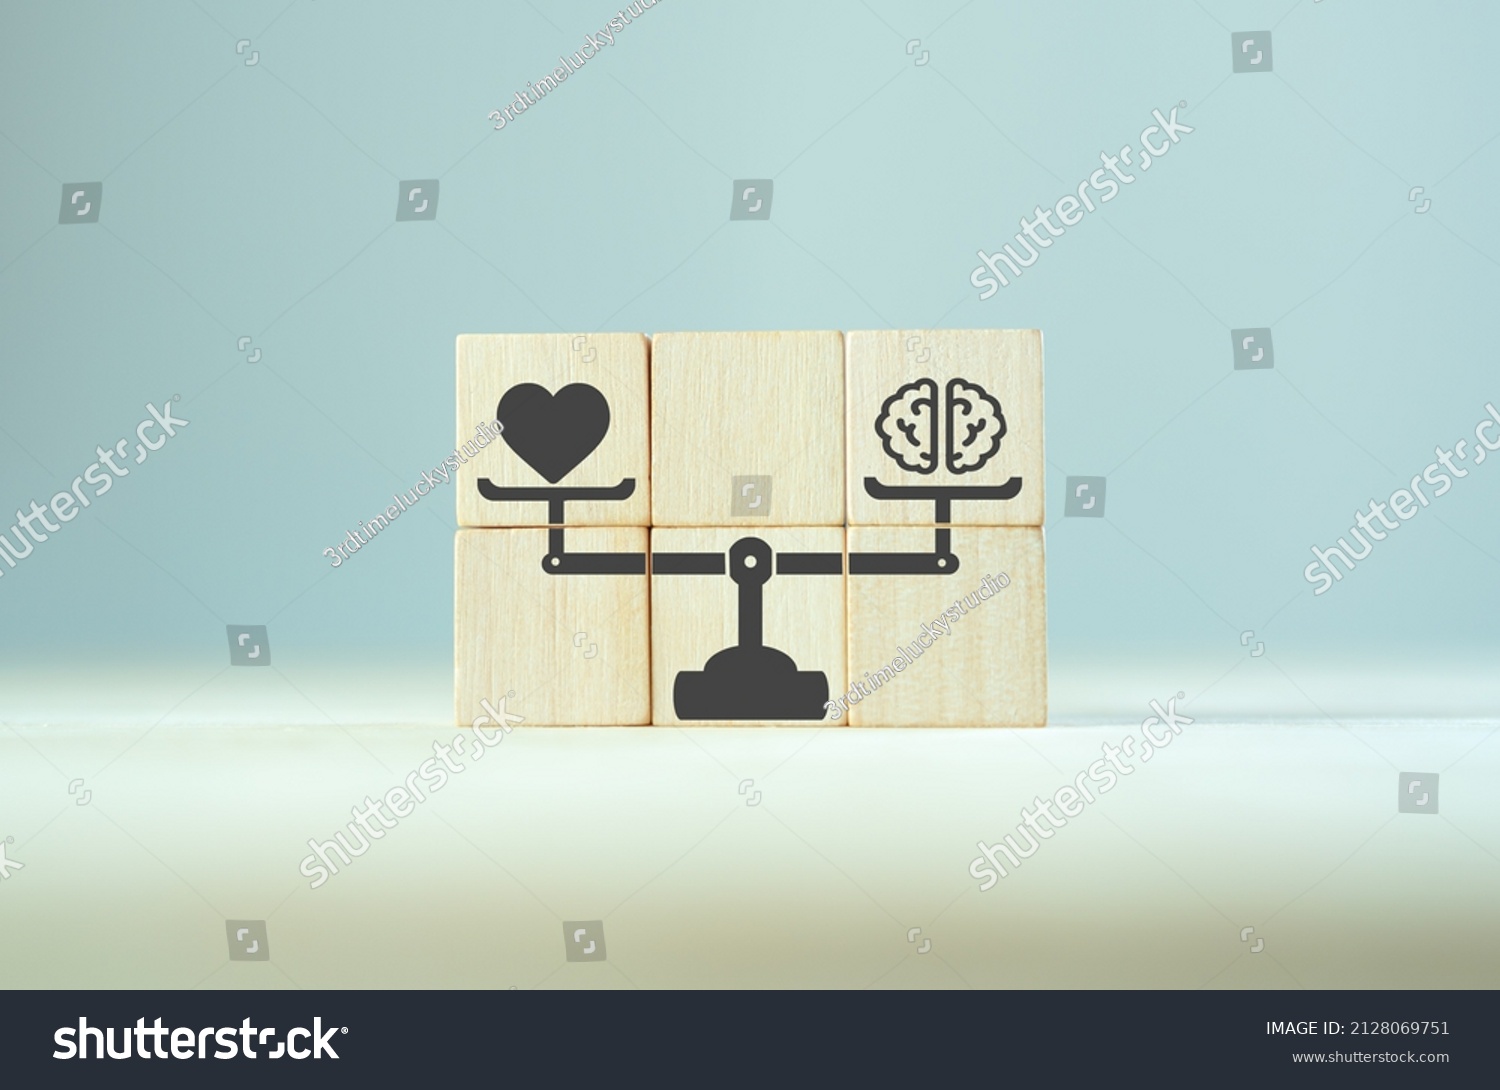 Balancing hard and soft skills concept. Training of skills Human resource management(HRM). wooden cubes with hard and soft skills on scales icon for comparison human skills. Grey background copy space #2128069751